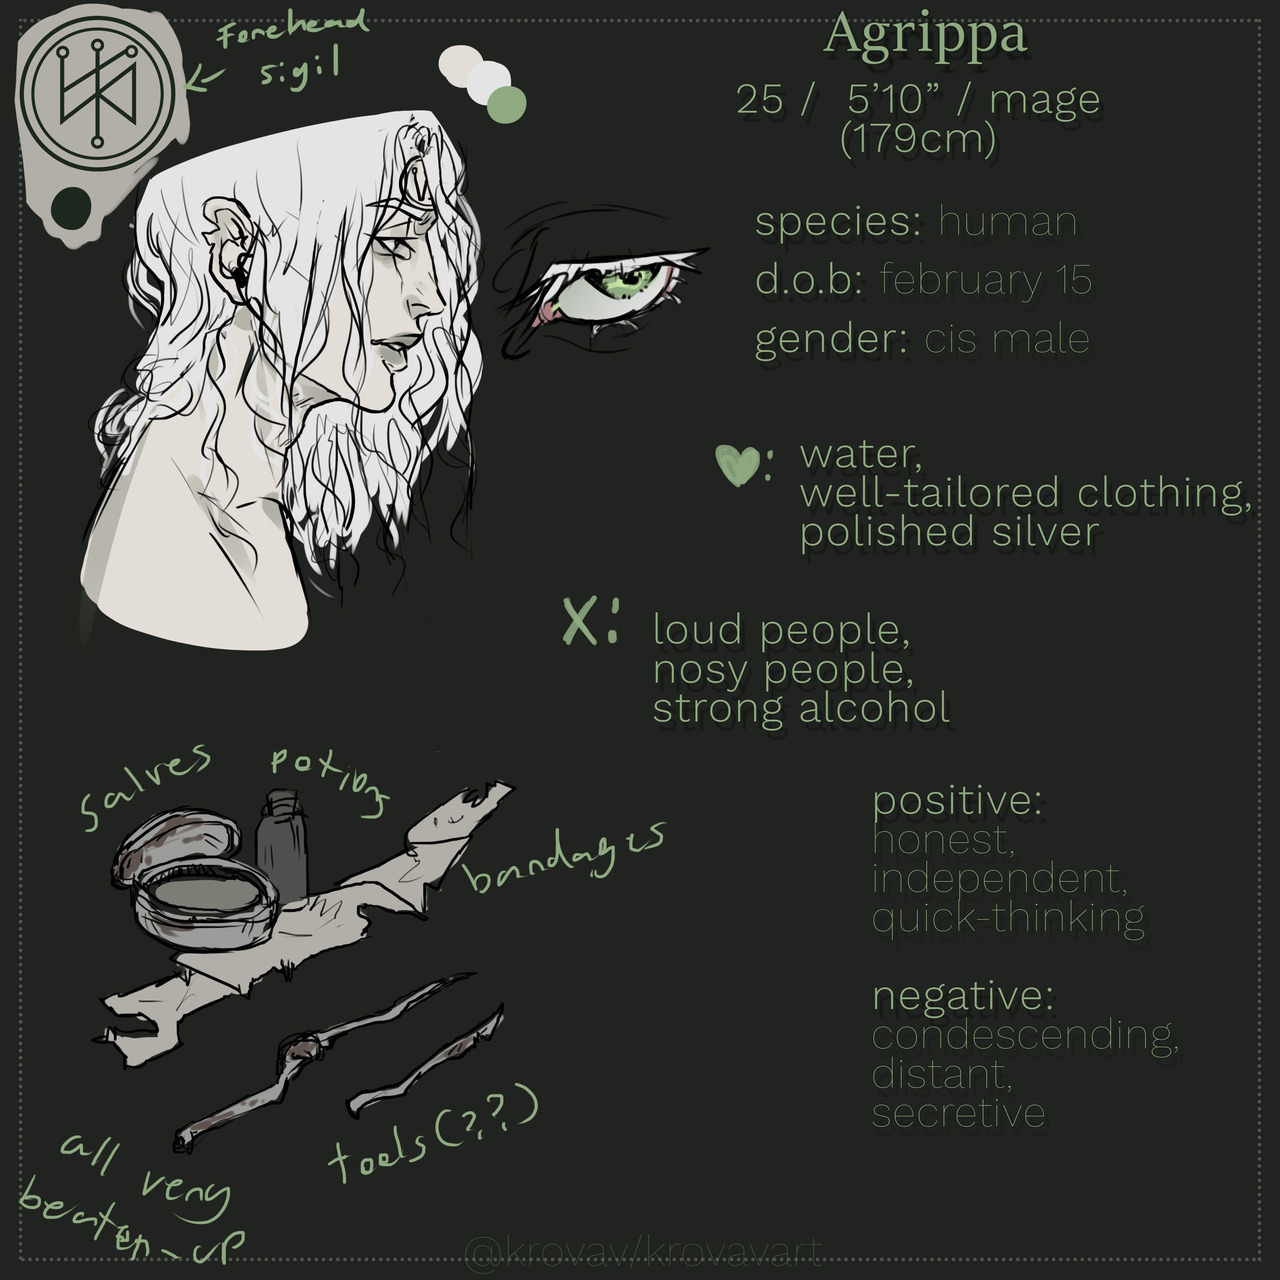 #MeettheOC: Agrippa (vote on my next #MeettheOC here)Finally putting out some info